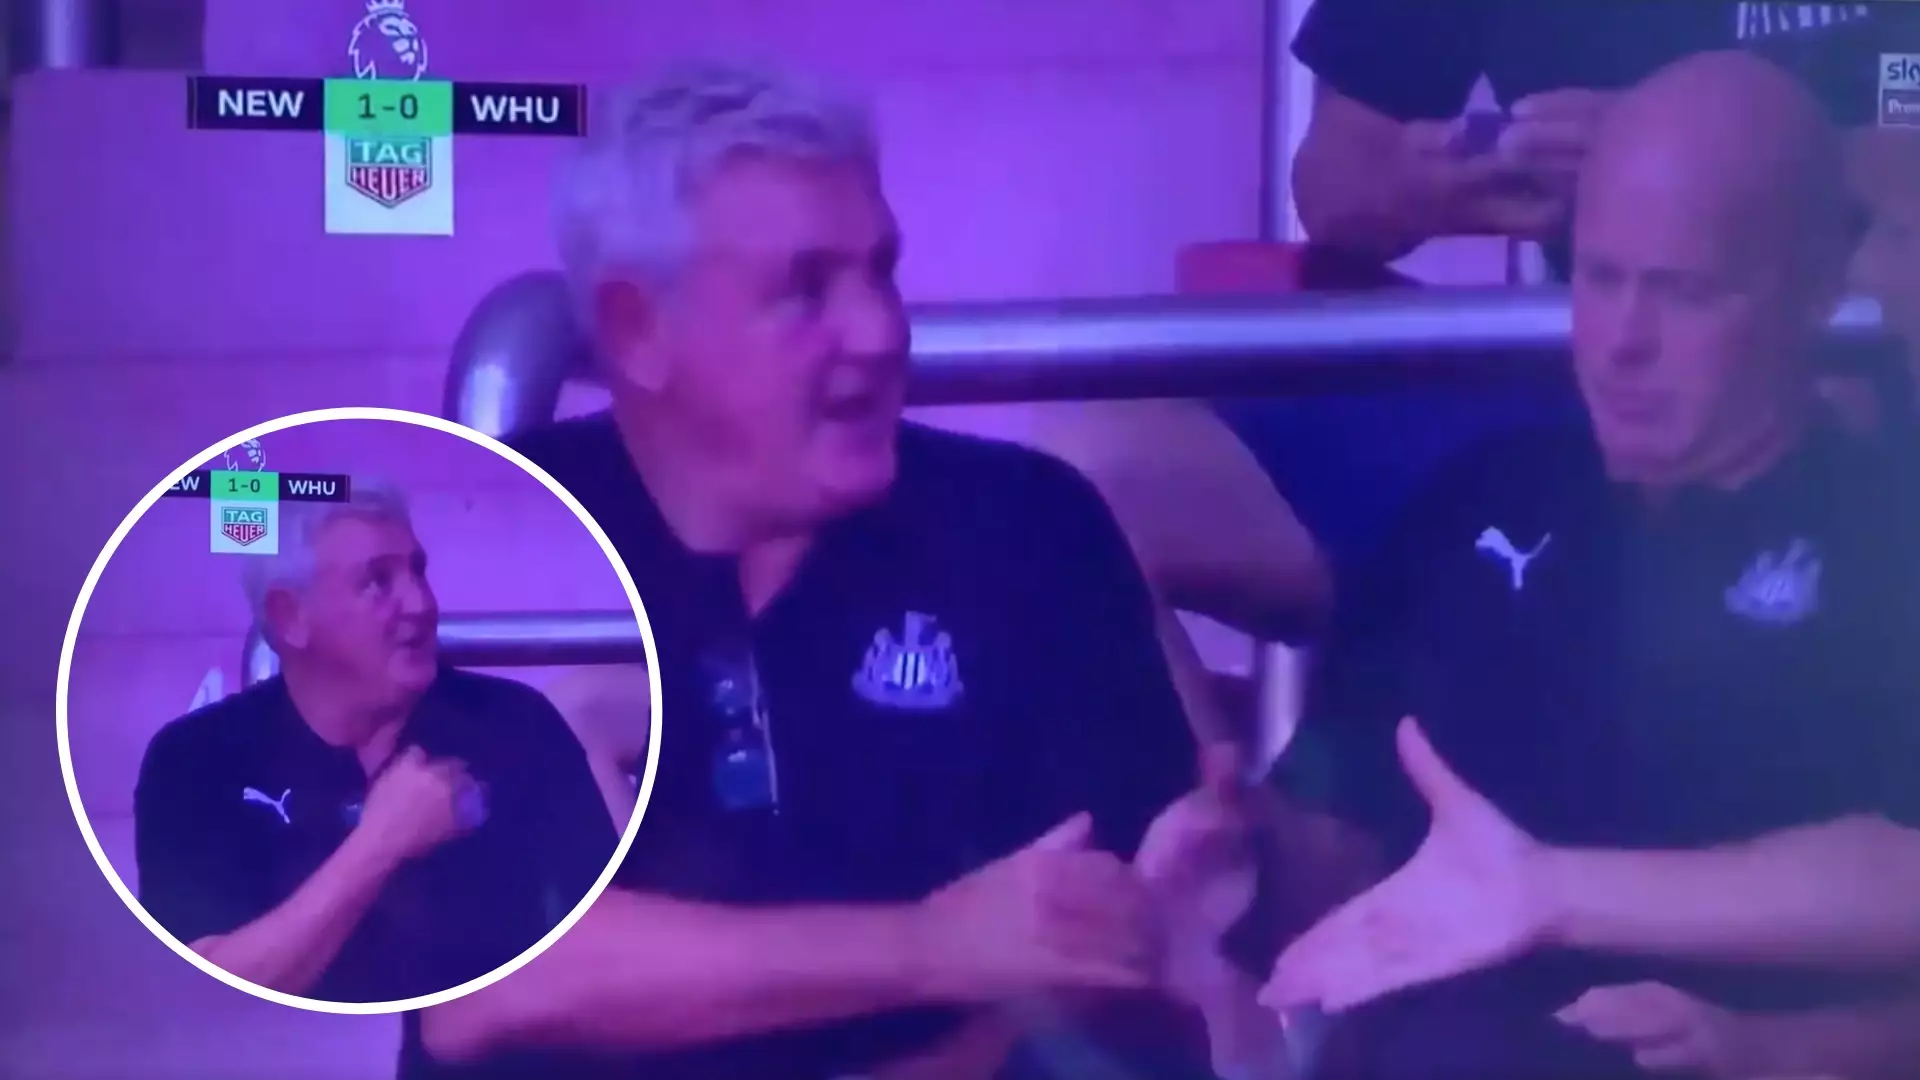 Steve Bruce Asked His Assistants ‘Shall We F**k Off Now?’ After Newcastle’s 1-0 Win Against West Ham